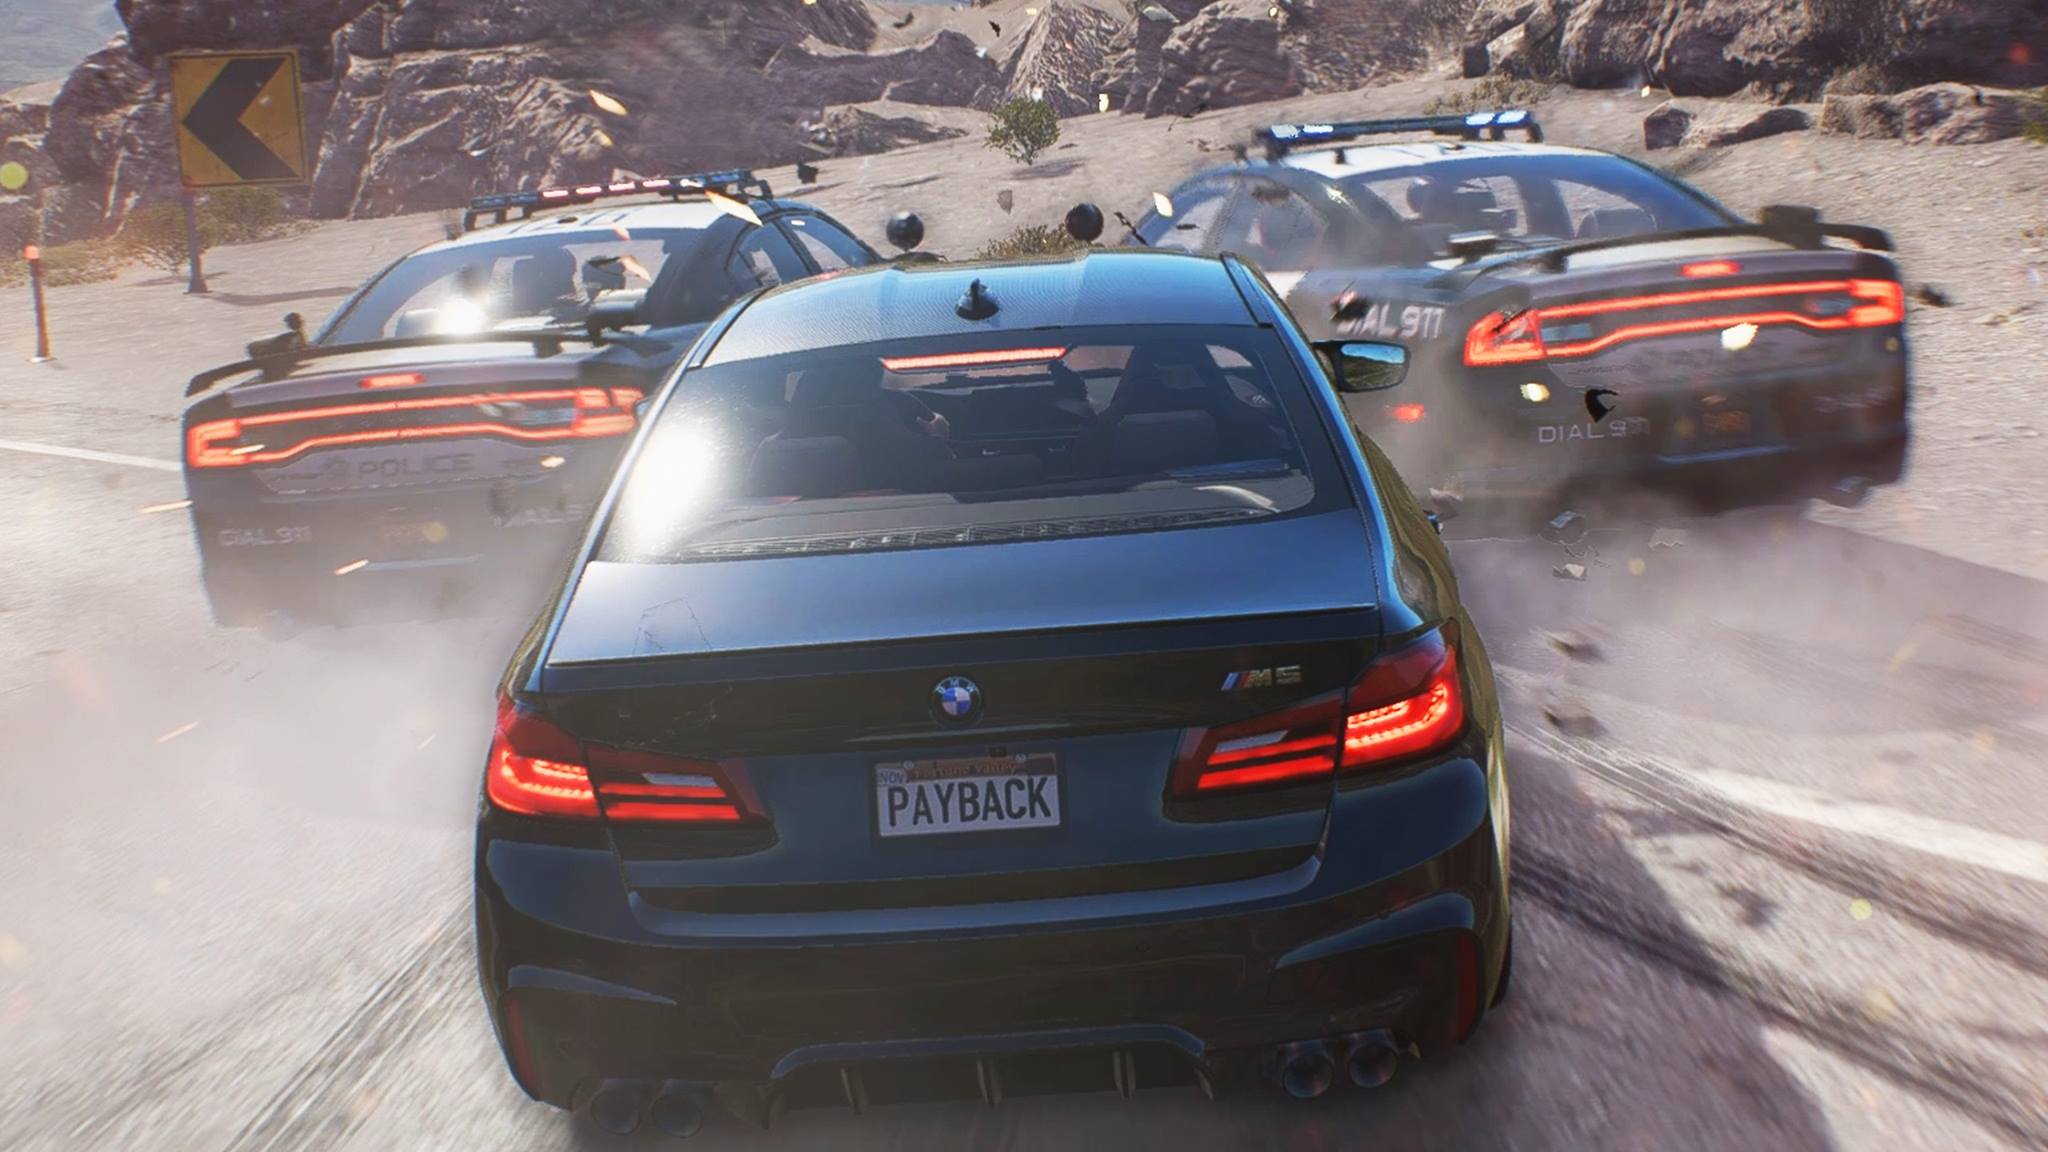 Need for Speed Payback (ps4). NFS Payback геймплей. Нфс пайбек на пс4. Nfs payback ps4